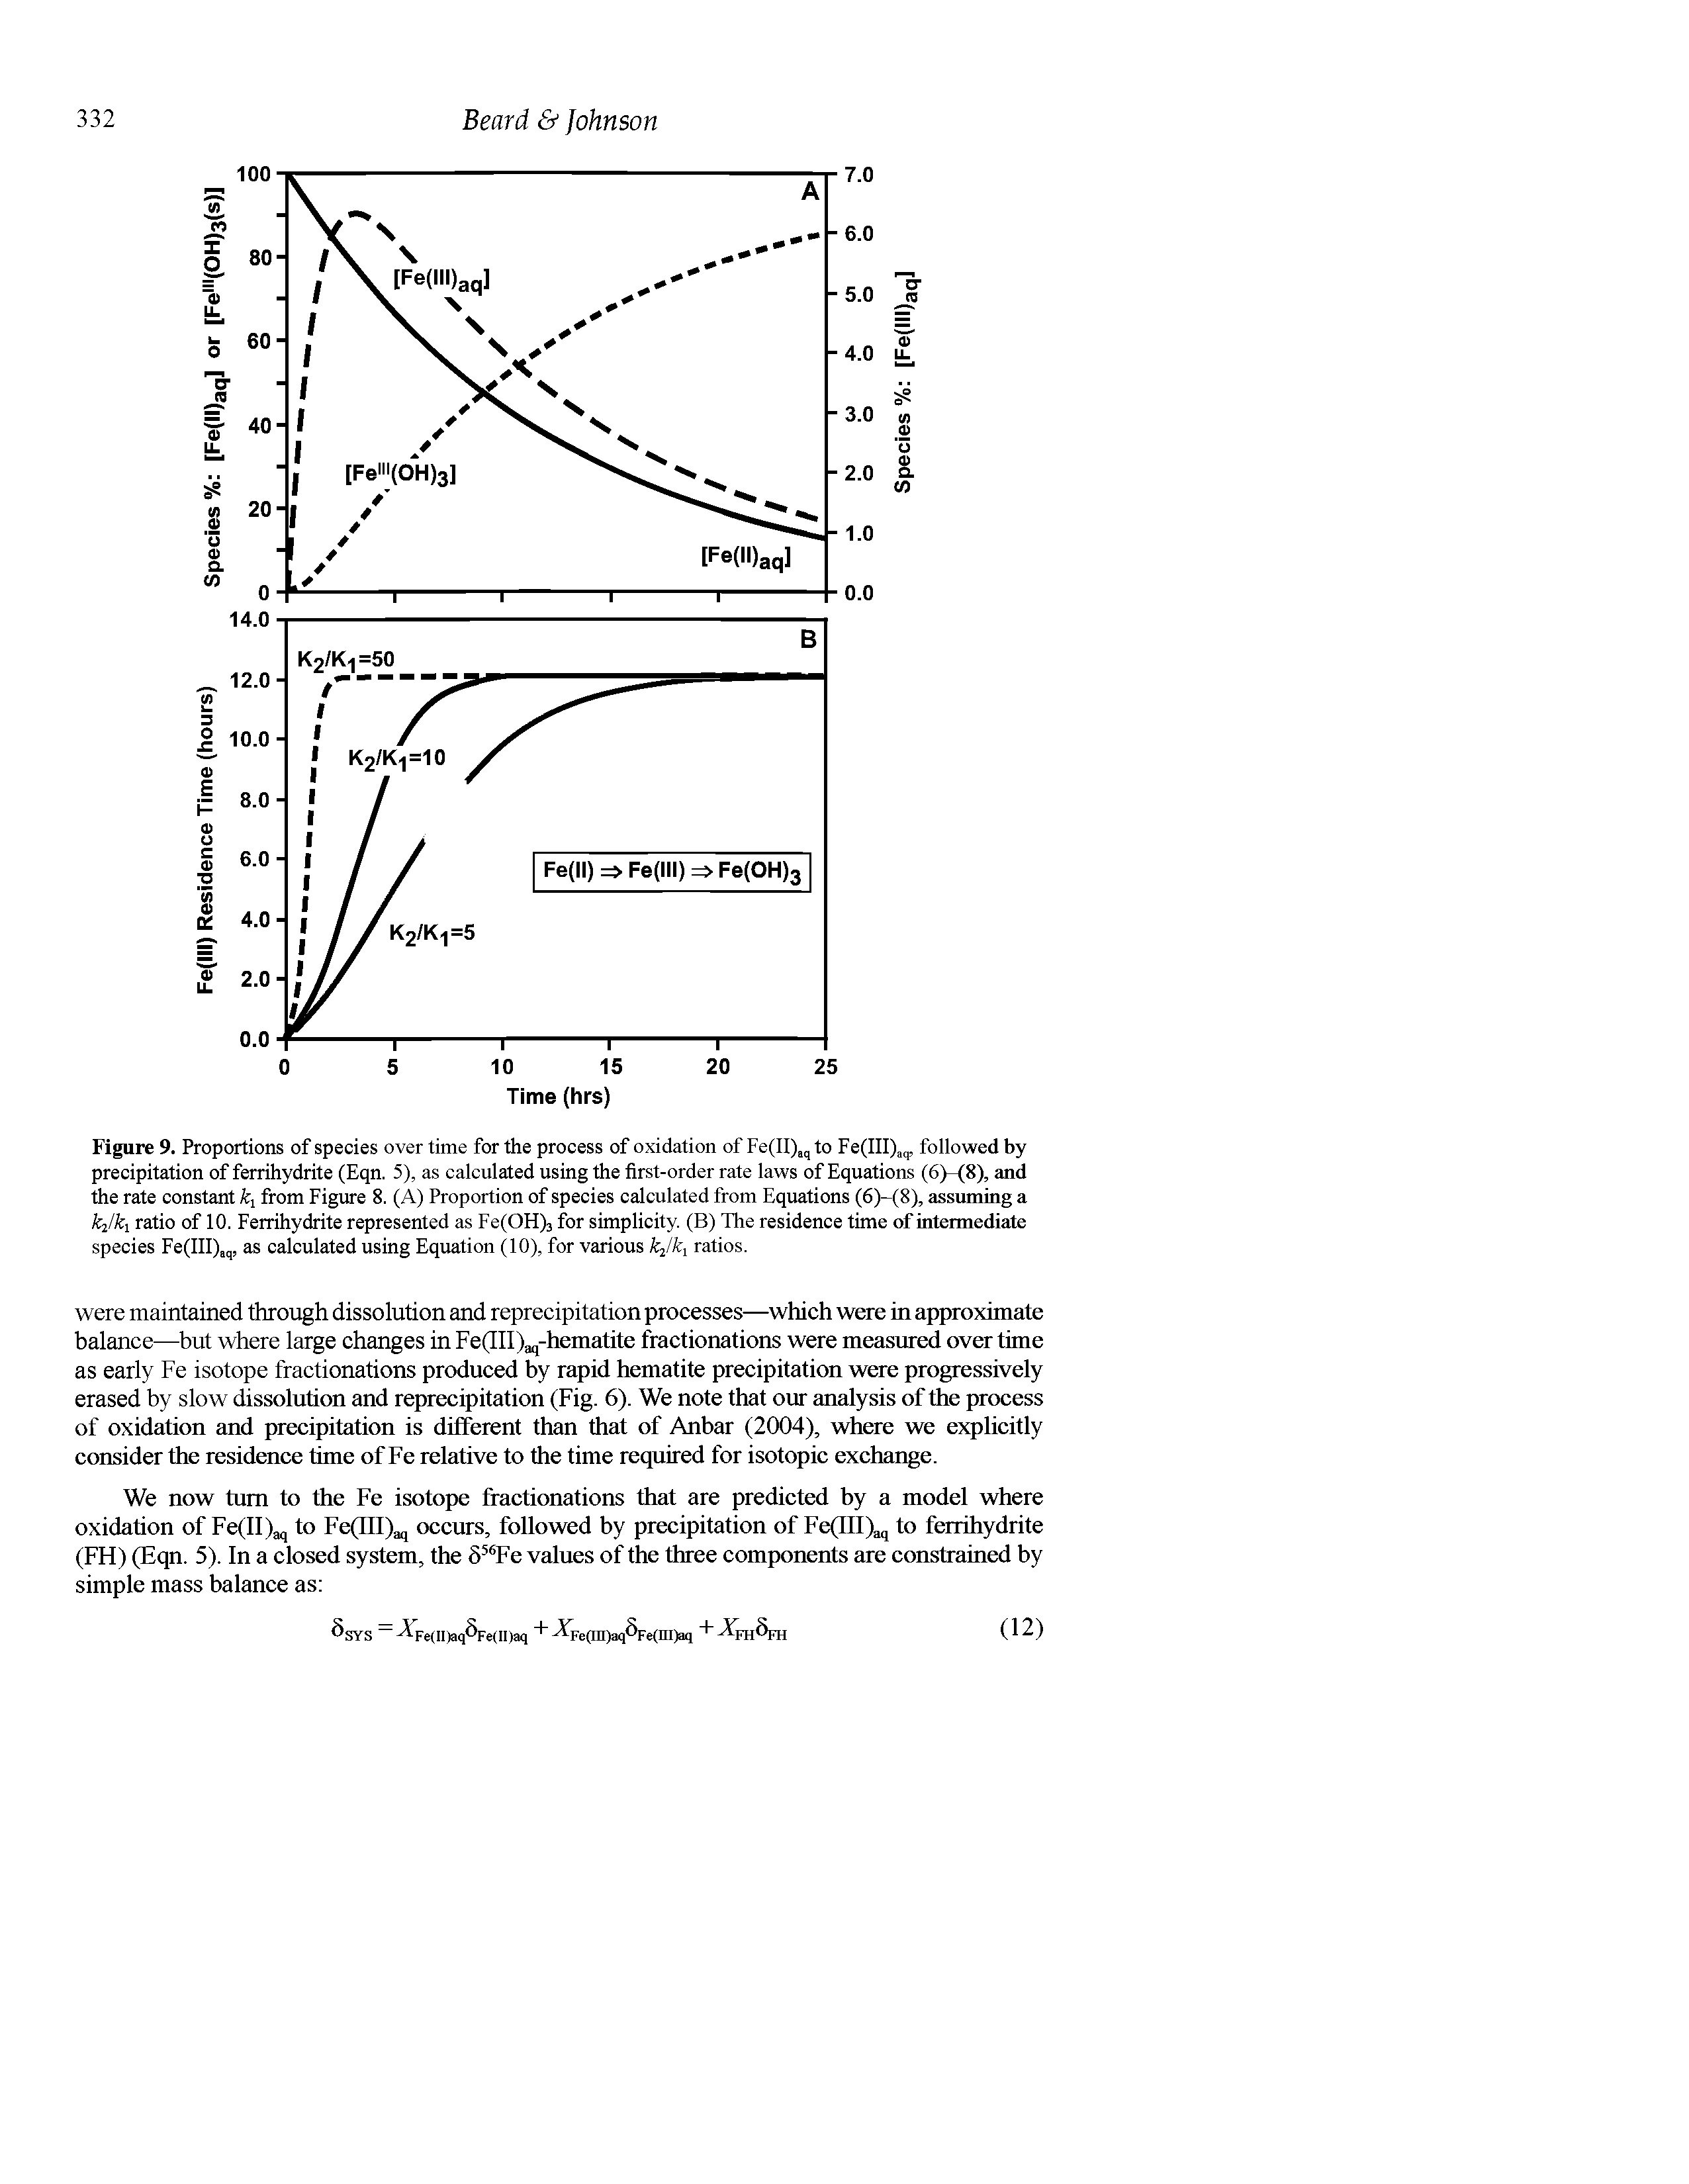 Figure 9. Proportions of species overtime for the process of oxidation of Fe(II),( to Fe(III), followed by precipitation of ferrihydrite (Eqn. 5), as calculated using the first-order rate laws of Equations (6)-(8), and the rate constant from Figure 8. (A) Proportion of species calculated from Equations (6)-(8), assuming a kilki ratio of 10. Ferrihydrite represented as Fe(OH)3 for simplicity. (B) The residence time of intermediate species Fe(III),q, as calculated using Equation (10), for various kjh ratios.